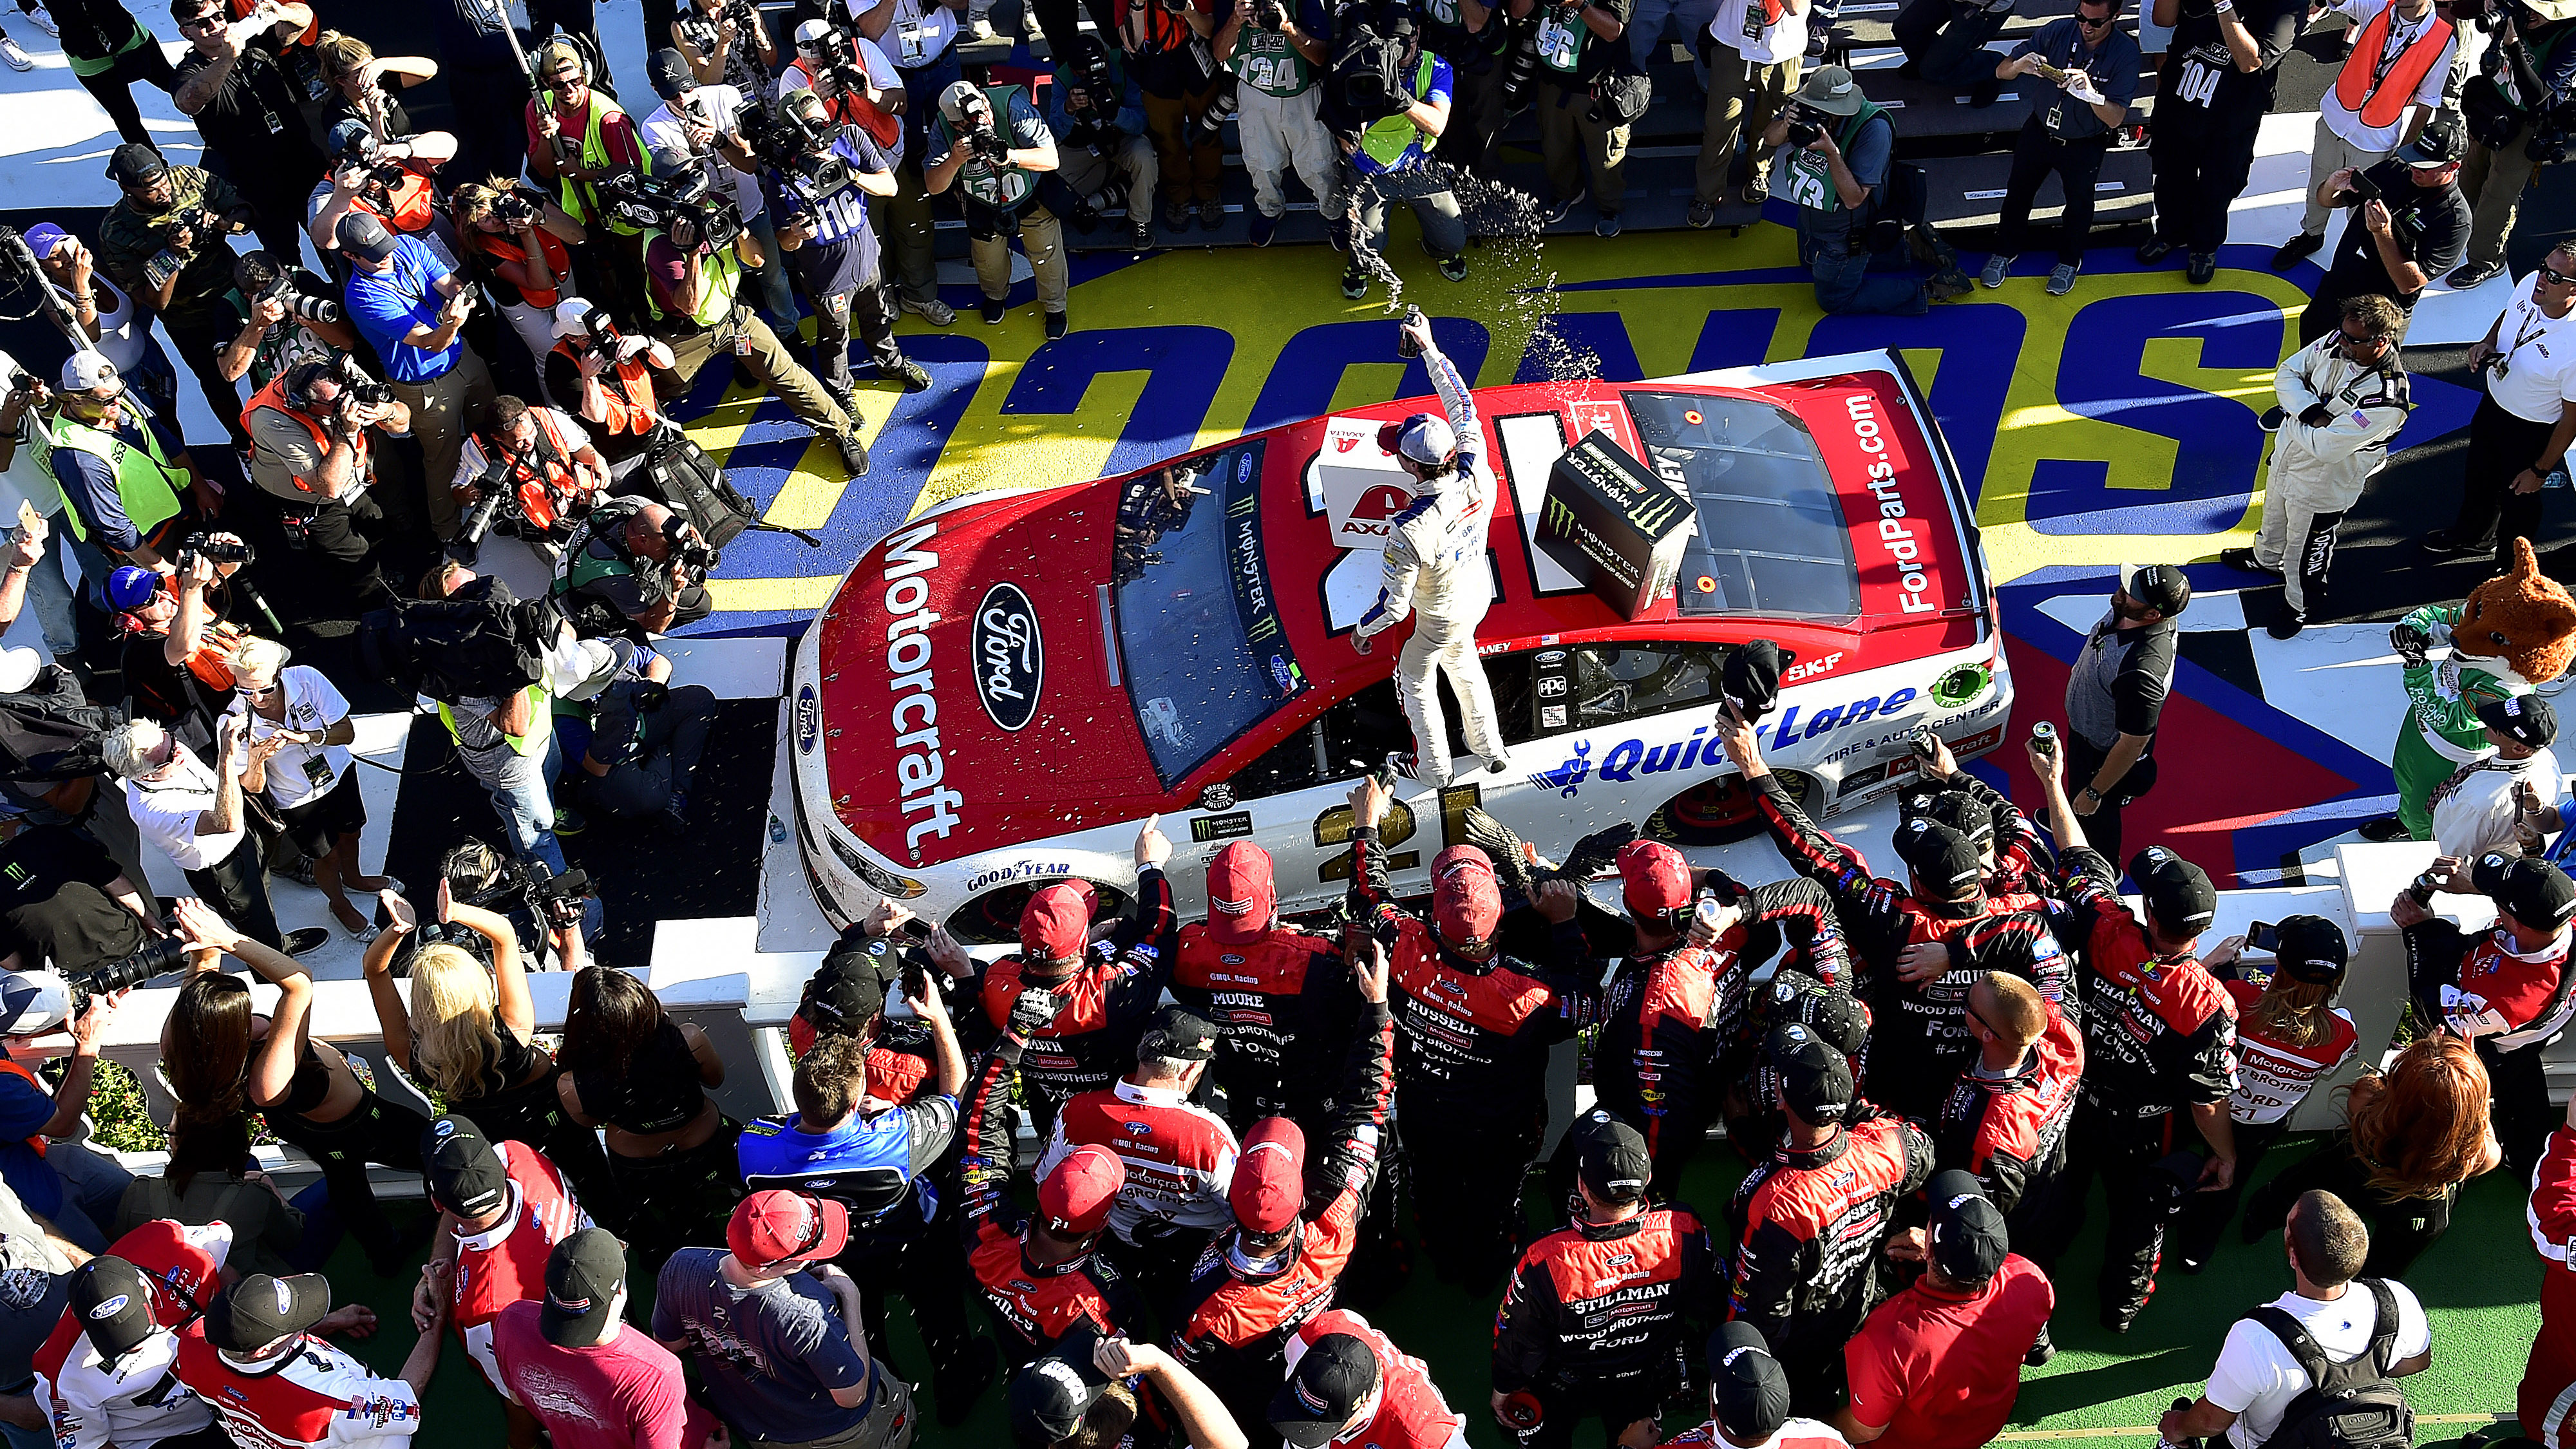 10 quick facts about Ryan Blaney's first Cup Series win